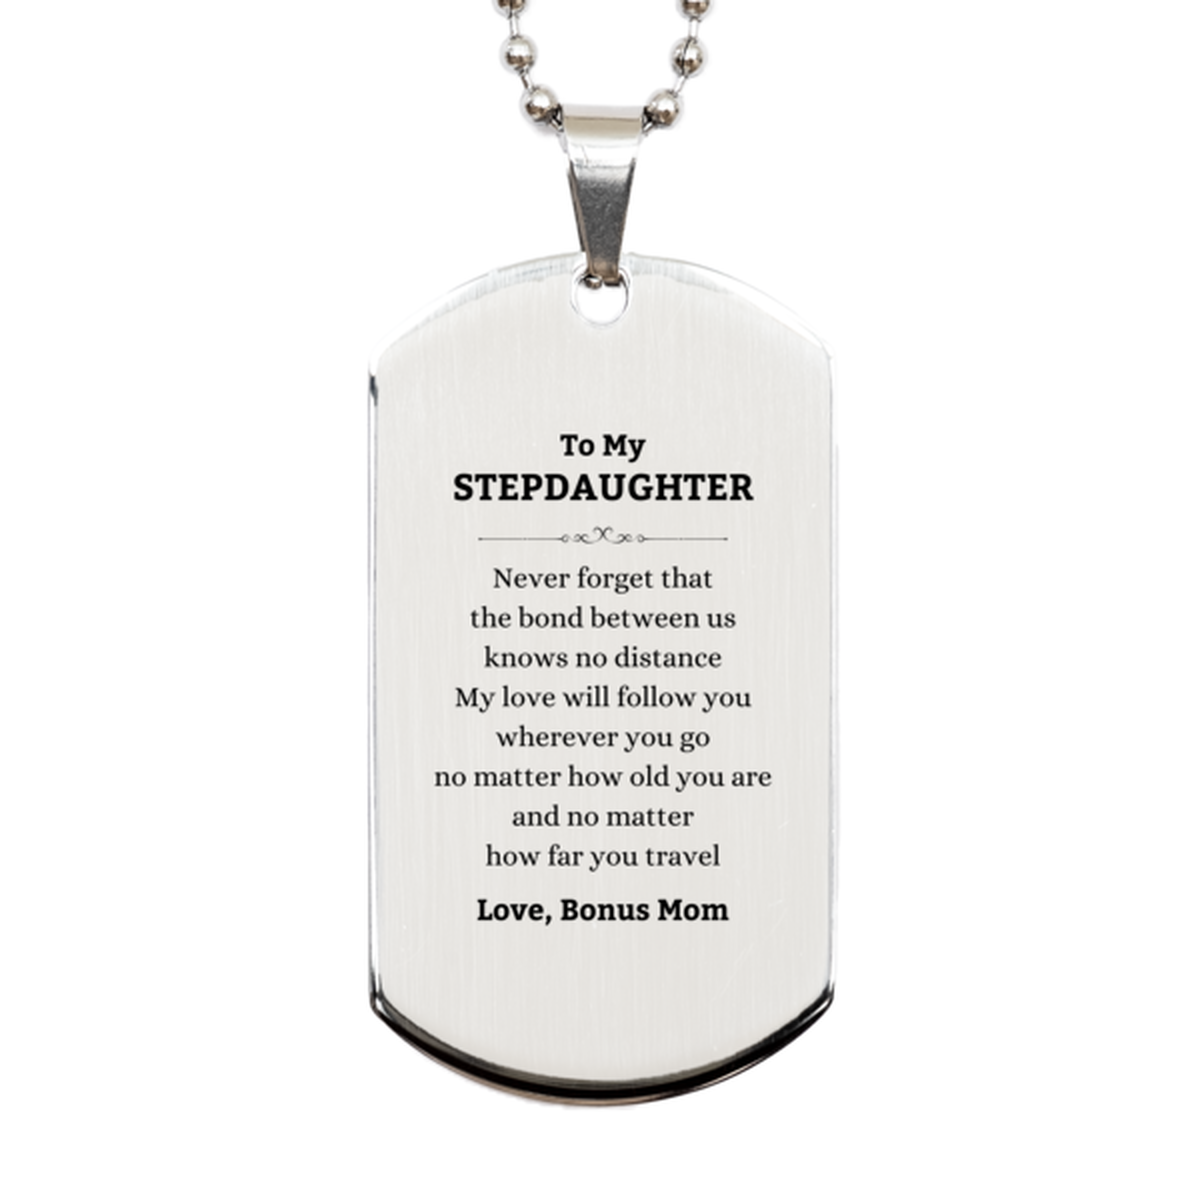 Stepdaughter Birthday Gifts from Bonus Mom, Adjustable Silver Dog Tag for Stepdaughter Christmas Graduation Unique Gifts Stepdaughter Never forget that the bond between us knows no distance. Love, Bonus Mom